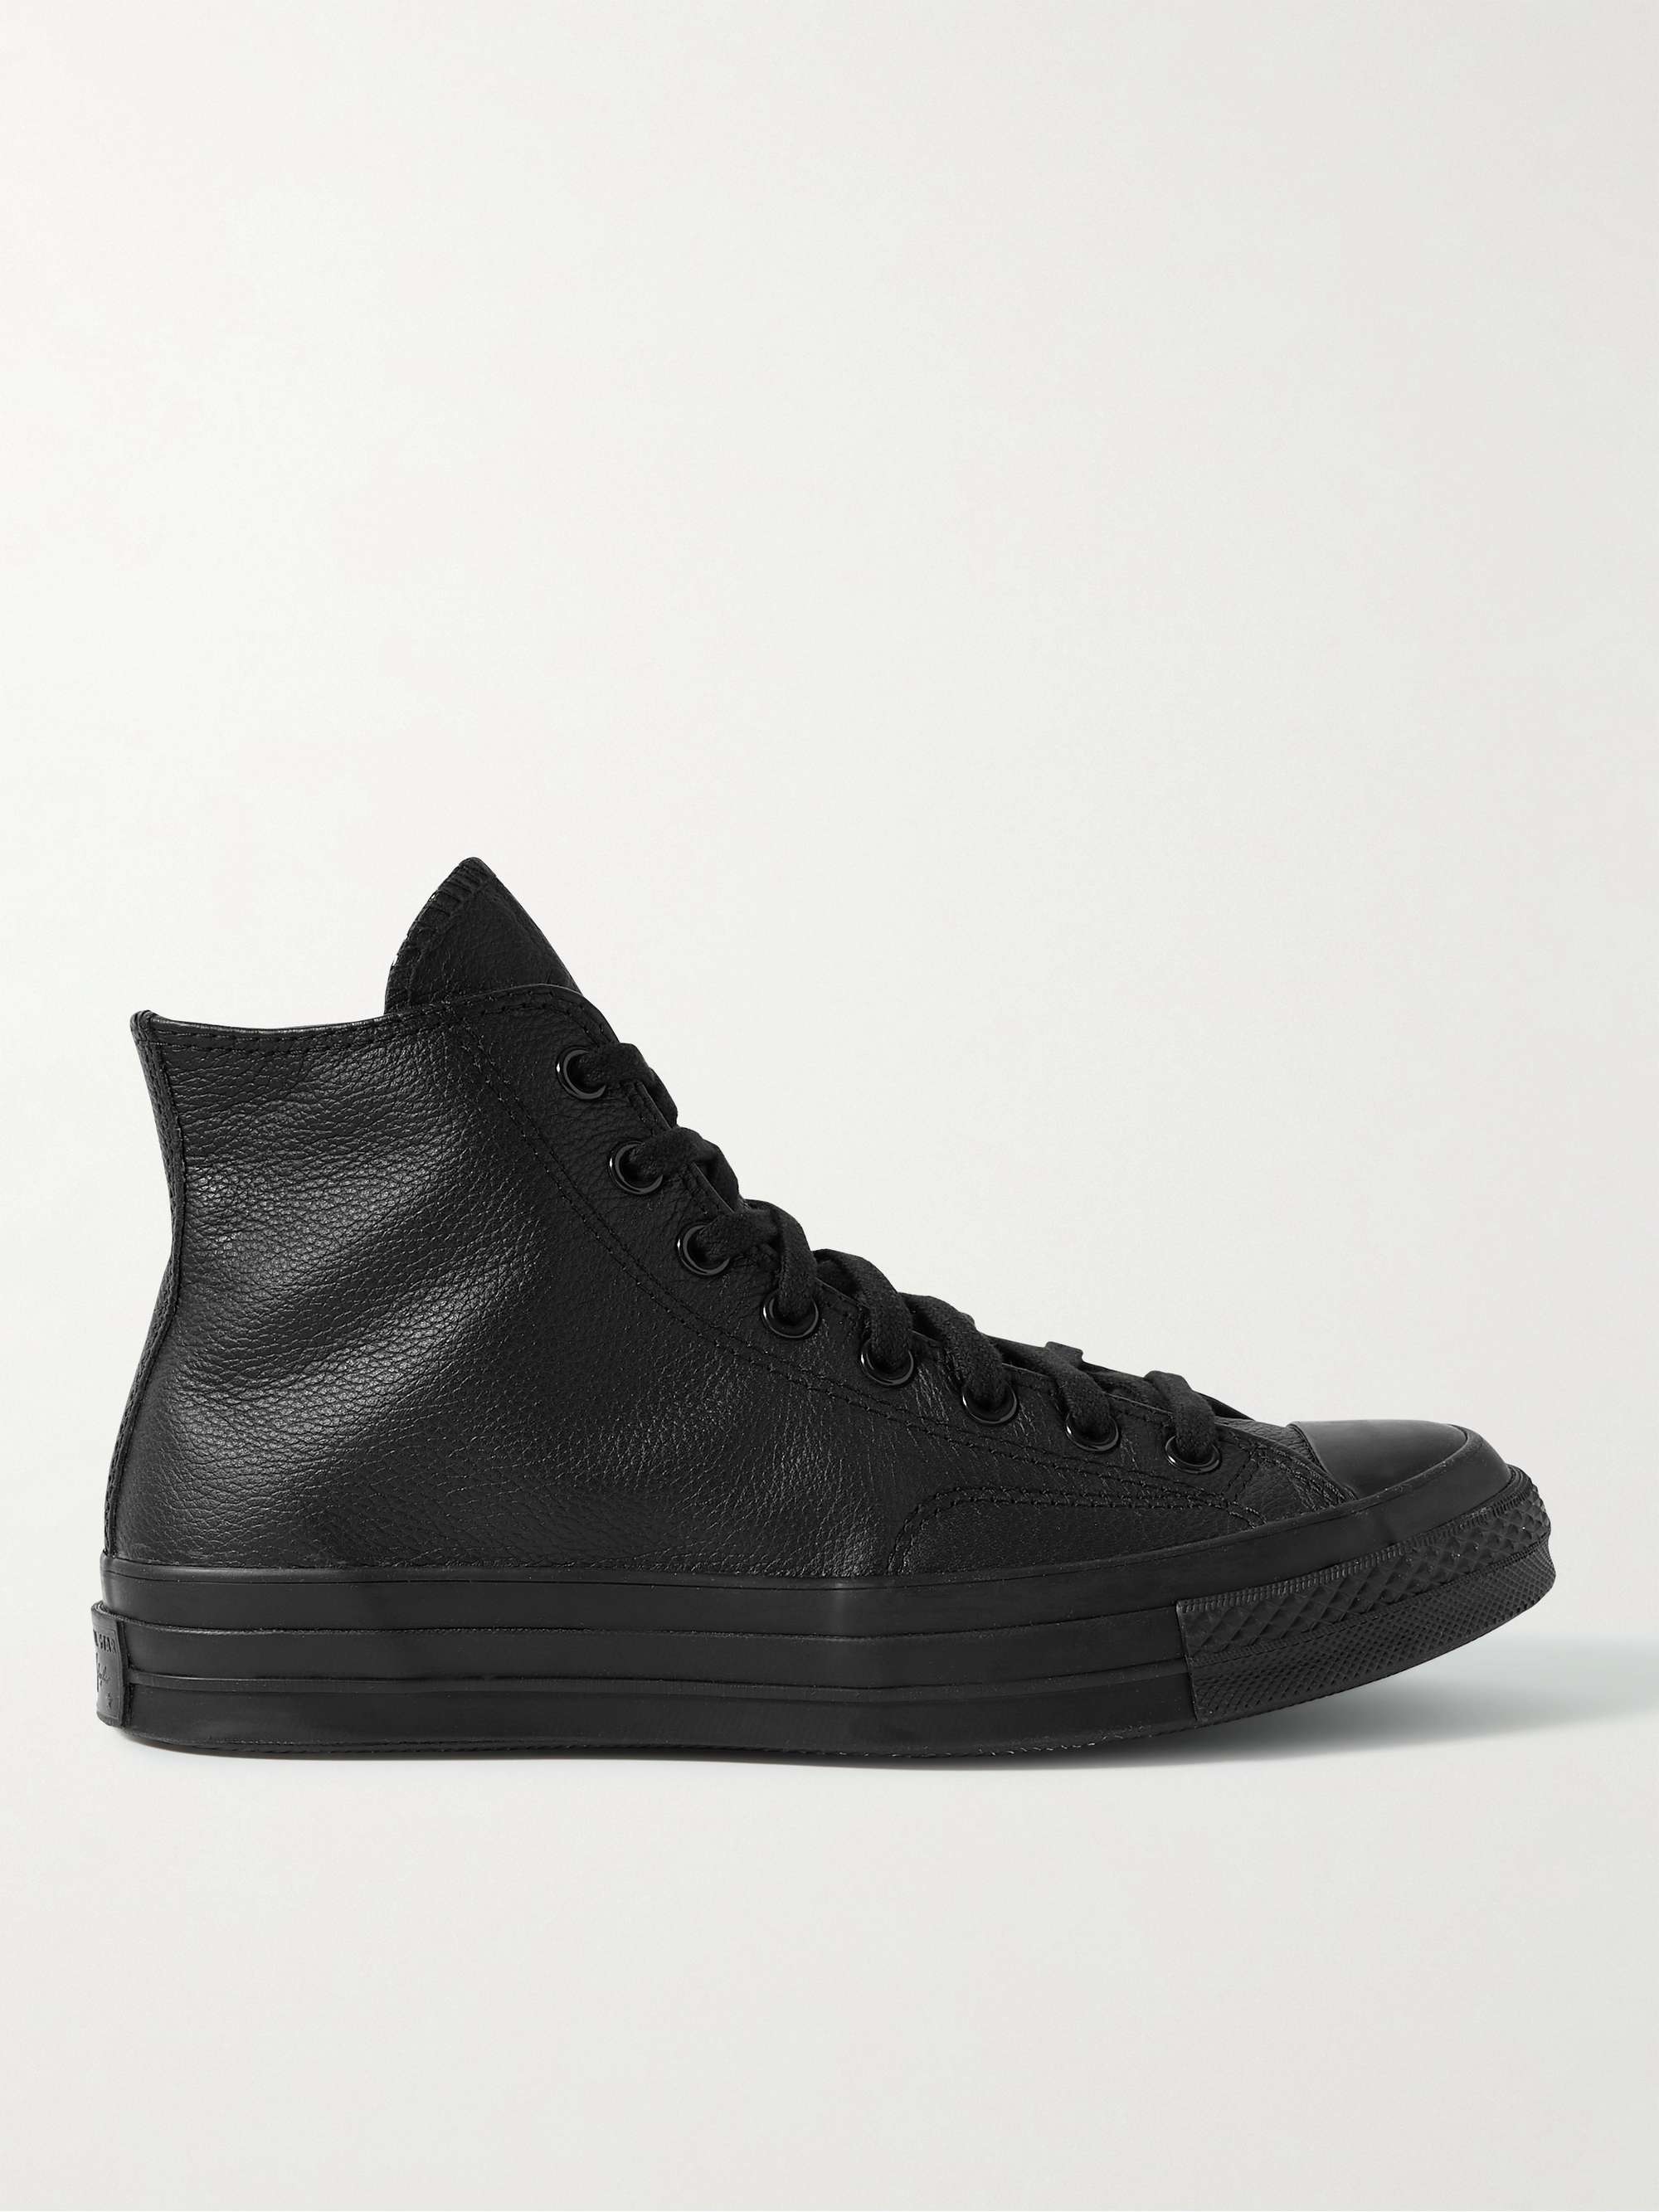 CONVERSE Chuck 70 Full-Grain Leather High-Top Sneakers | MR PORTER